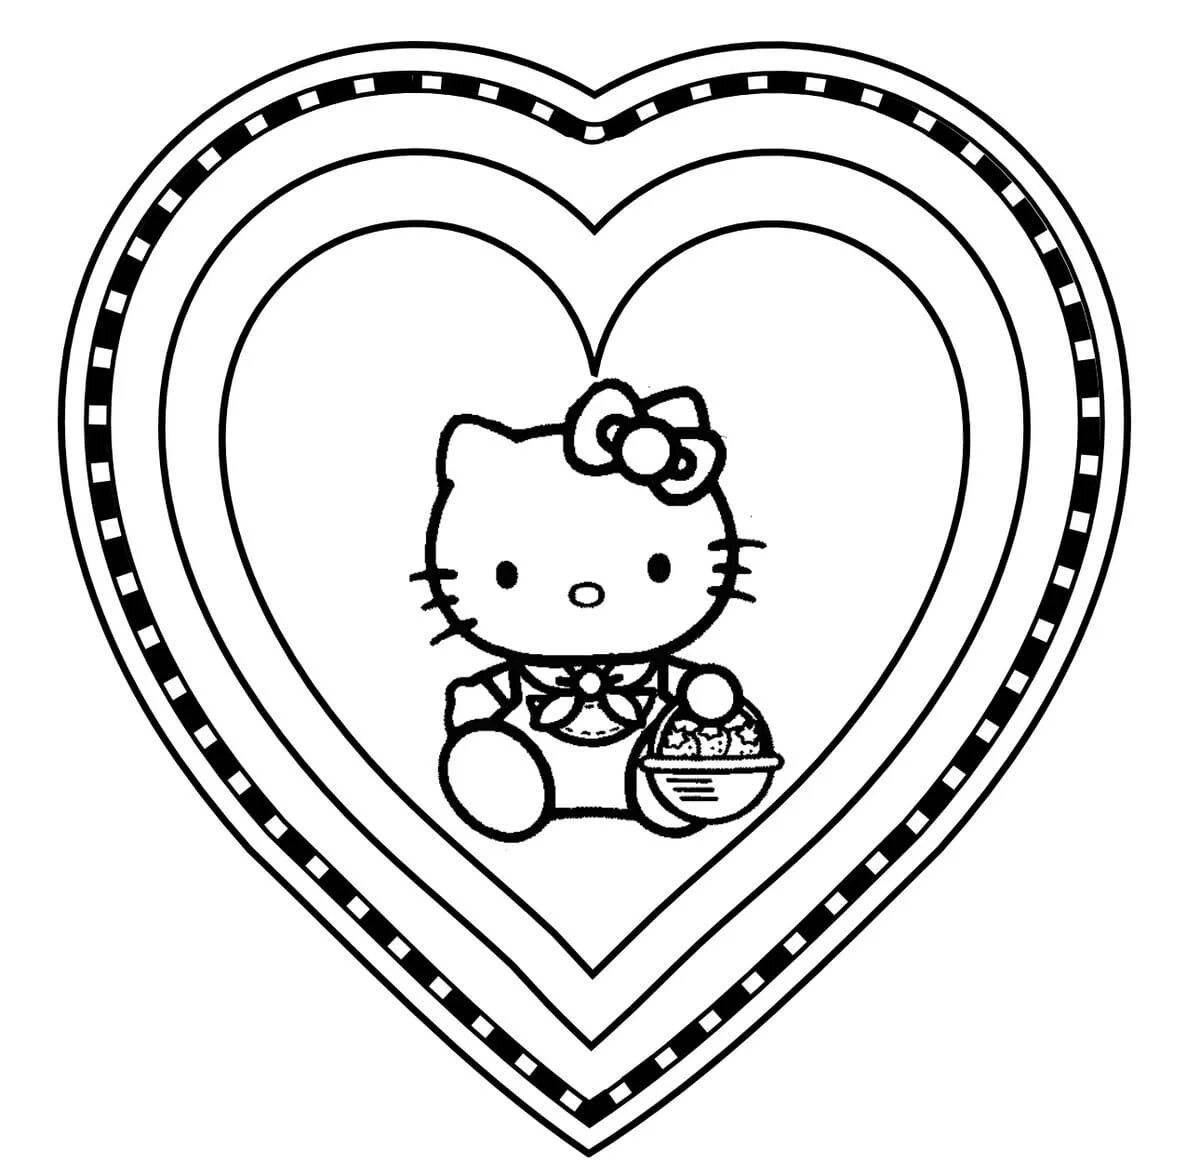 Adorable hello kitty coloring book with heart